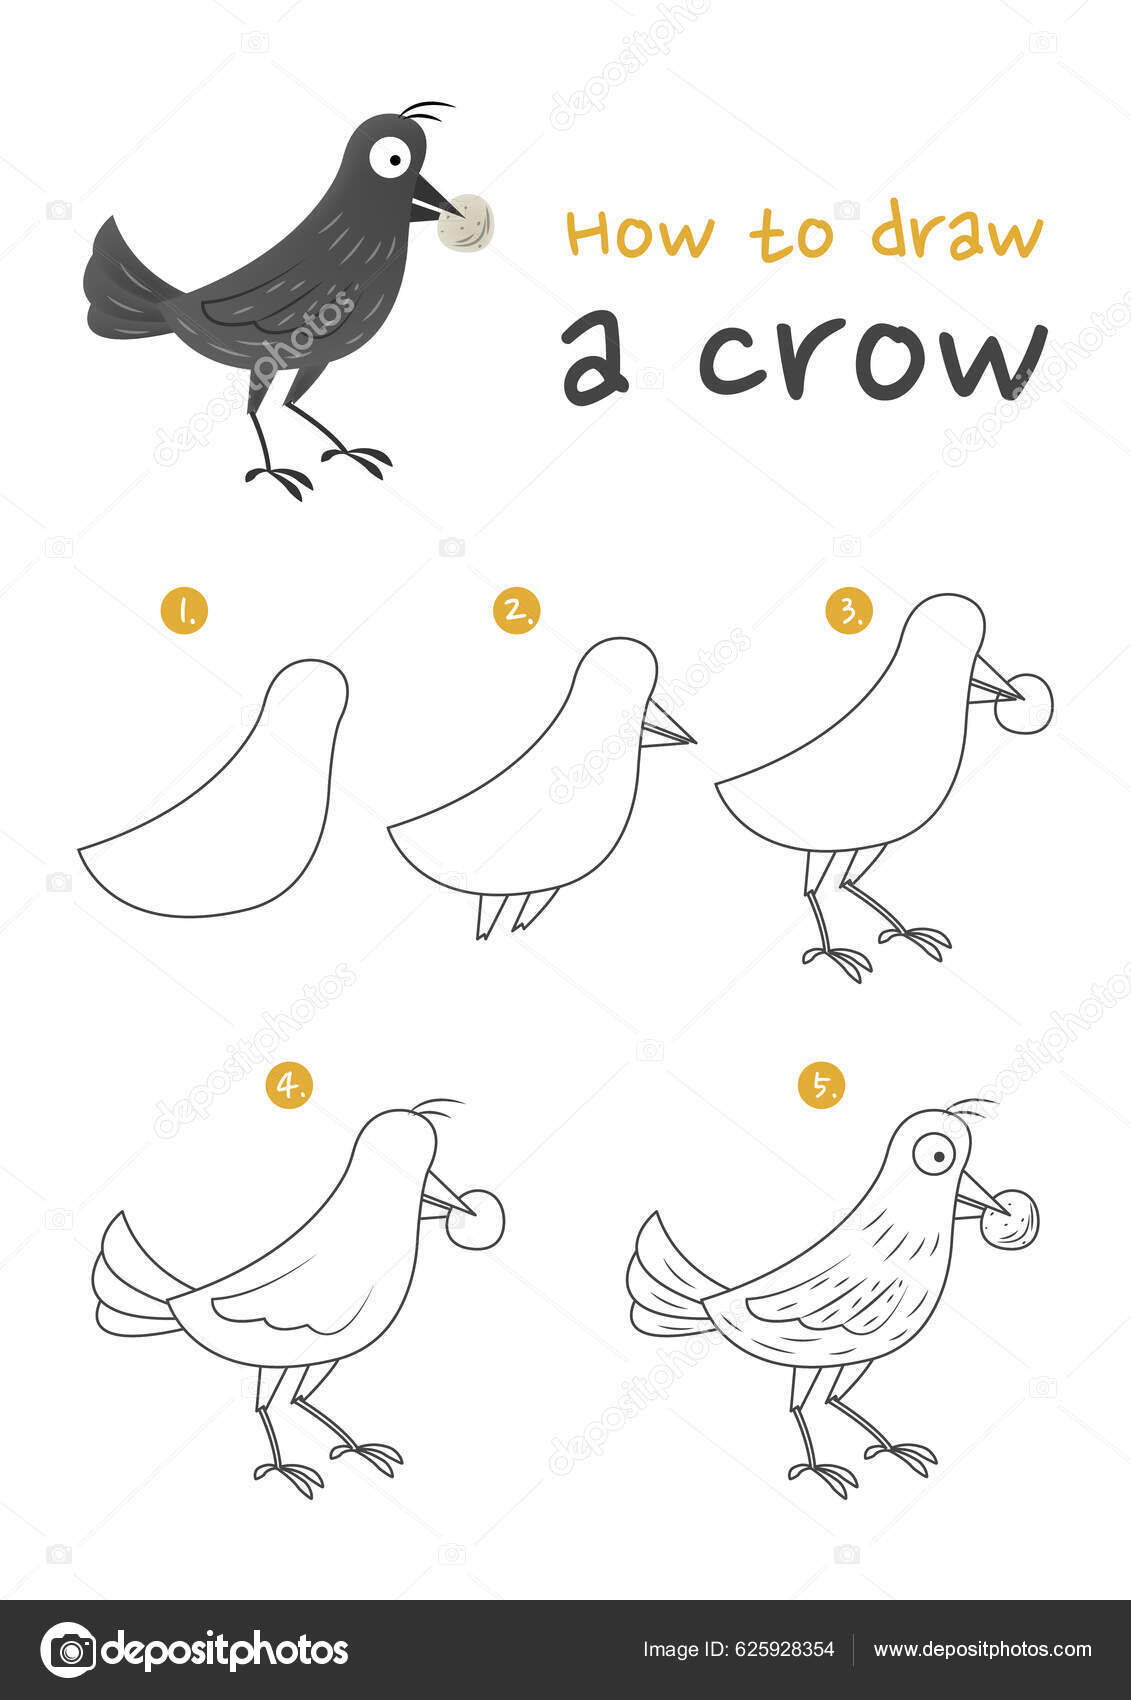 crow drawing easy step - YouTube